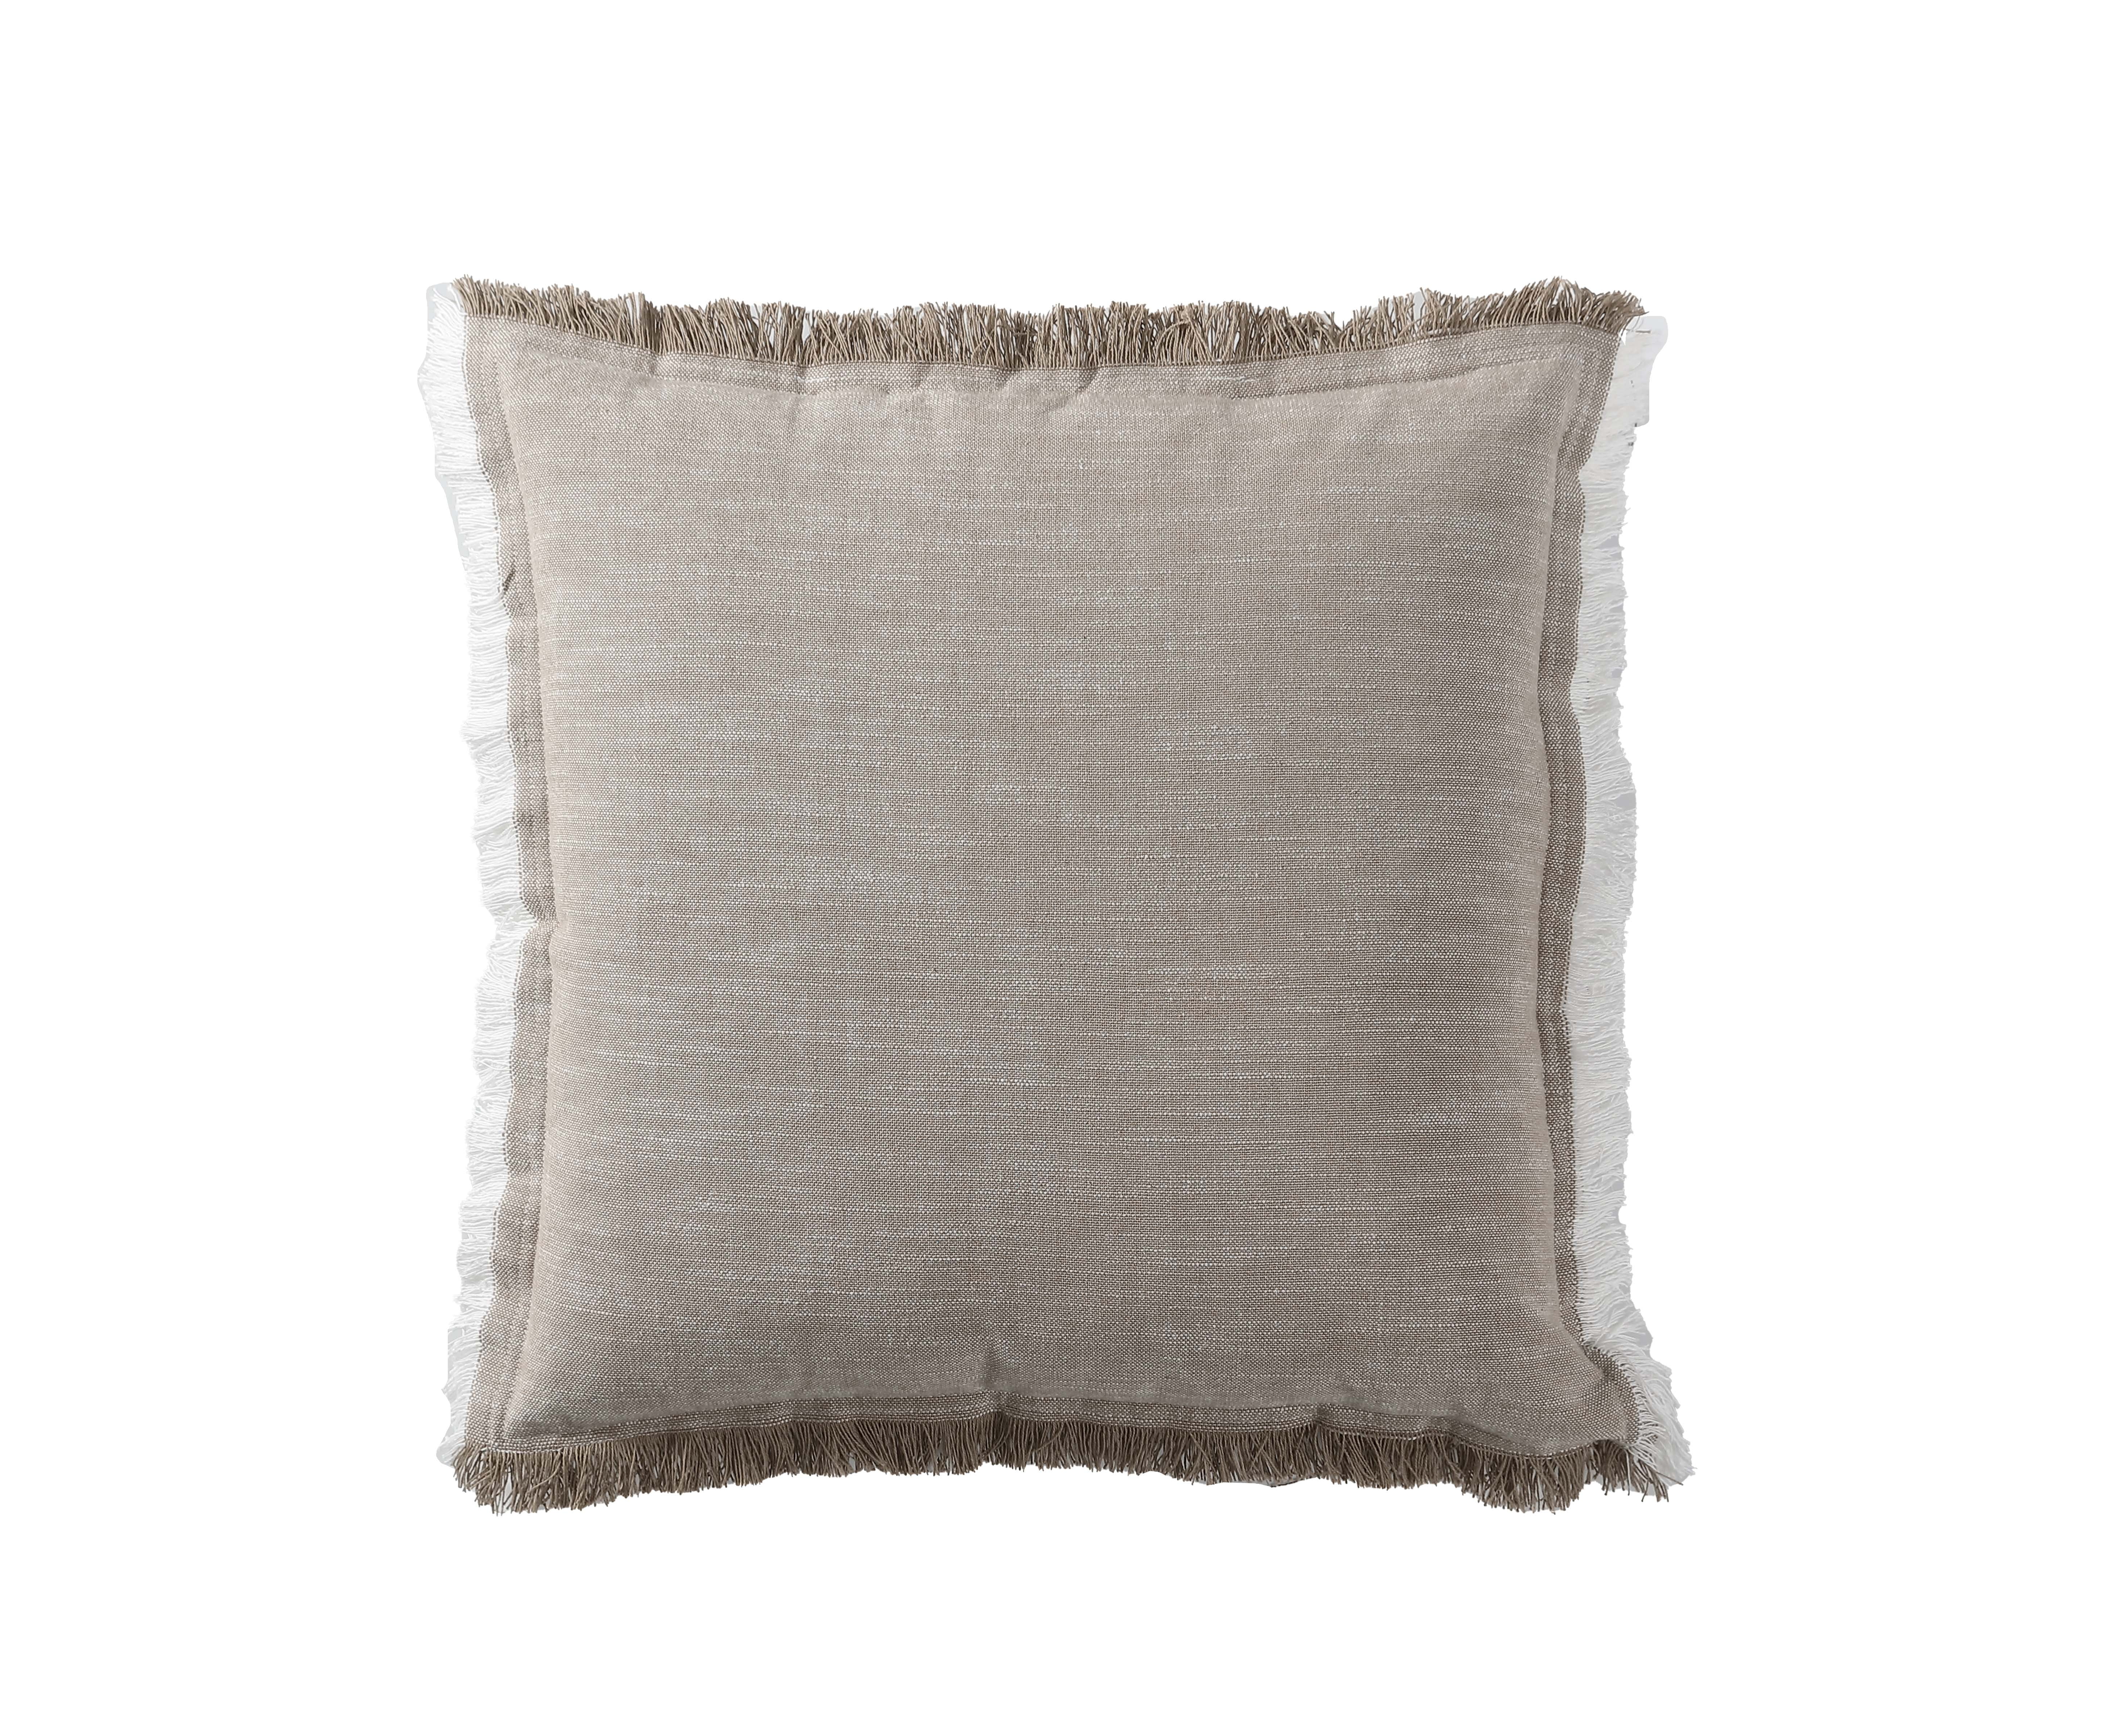 Better Homes & Gardens Decorative Throw Pillow, Cotton Fringe, Square,  Grey, 20''x20'', 2 Pack